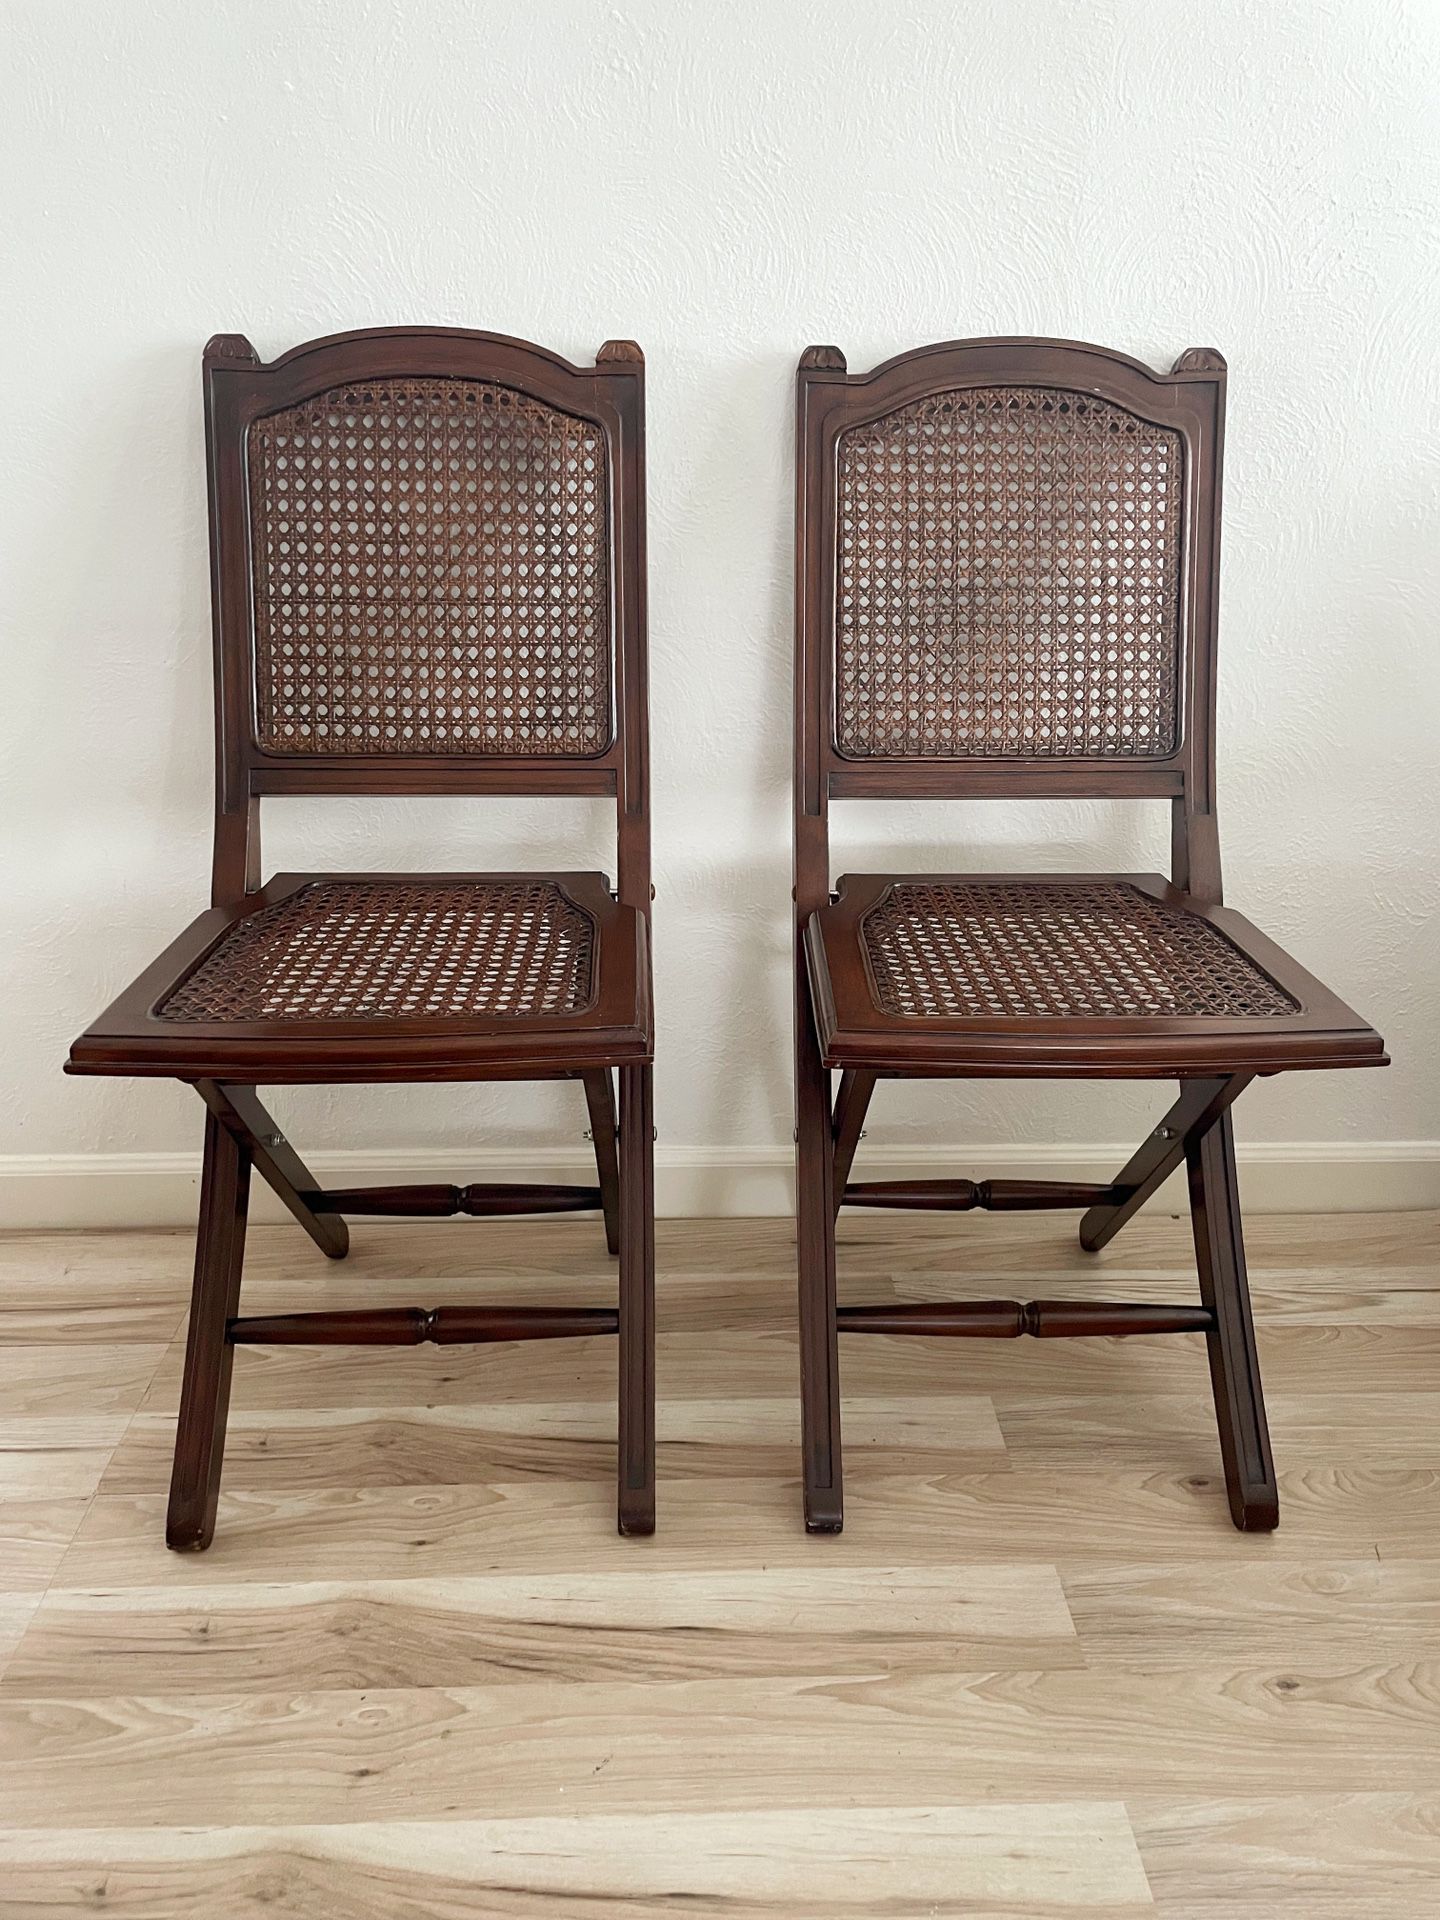 Pair of Ballard Designs Wood and Cane Folding Chairs